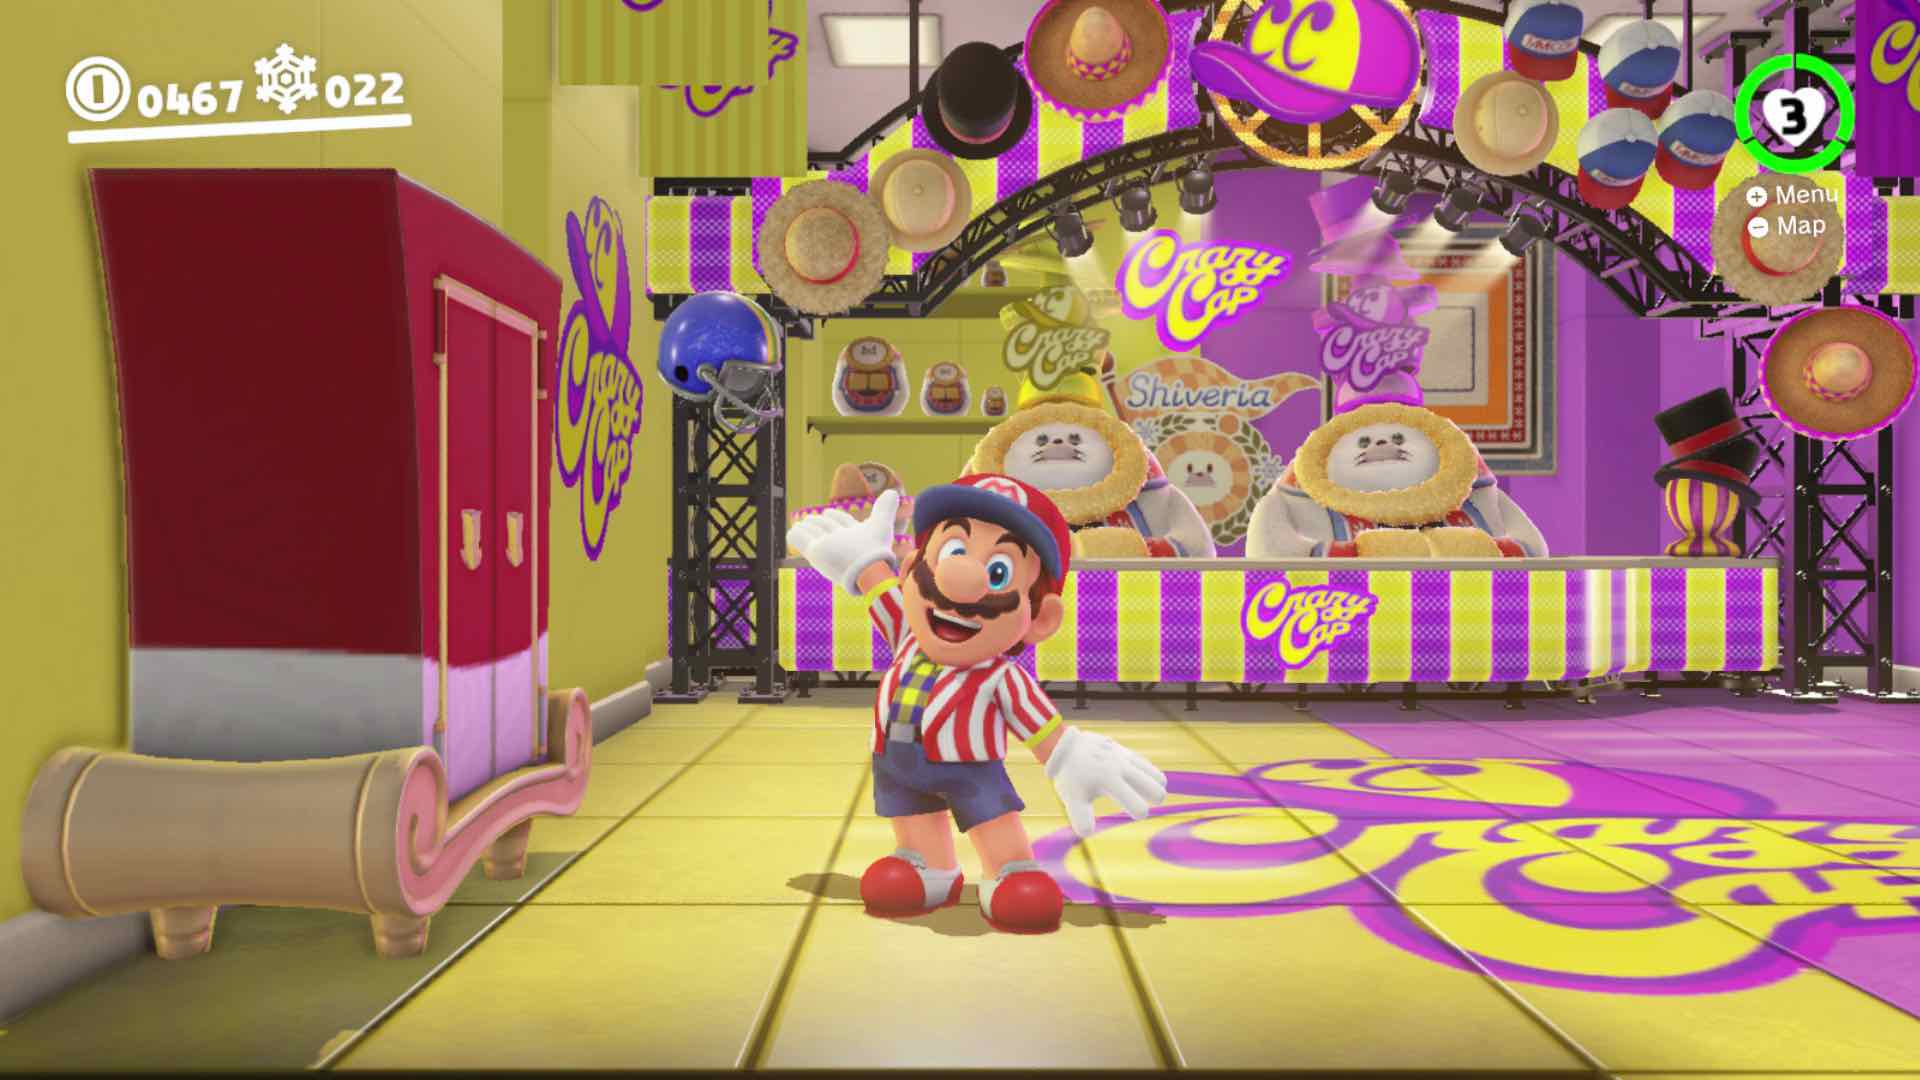 fashionable-outfit-super-mario-odyssey-screenshot